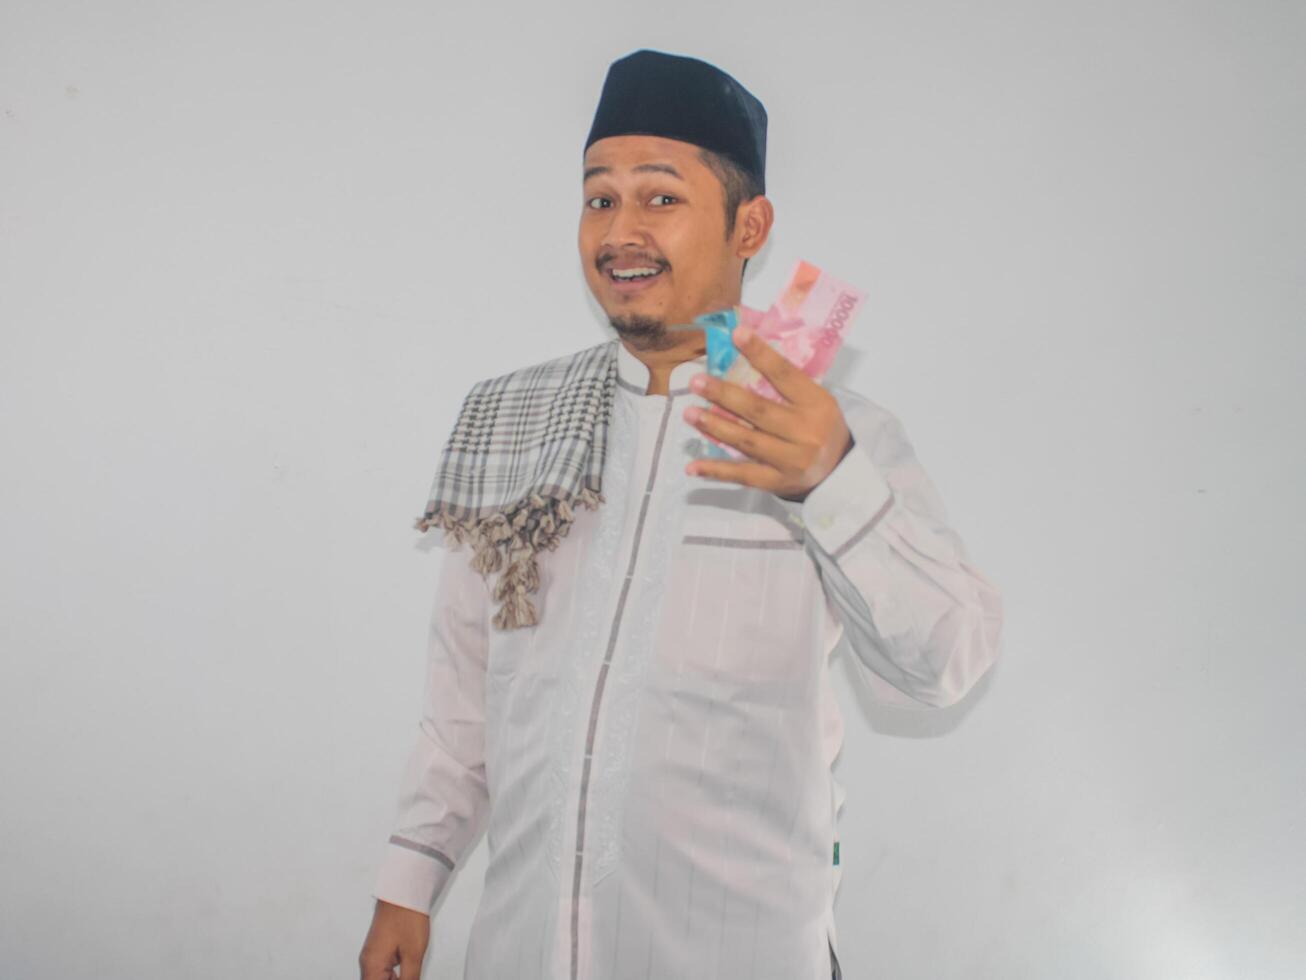 Asian Moslem man smiling happy while showing paper money photo